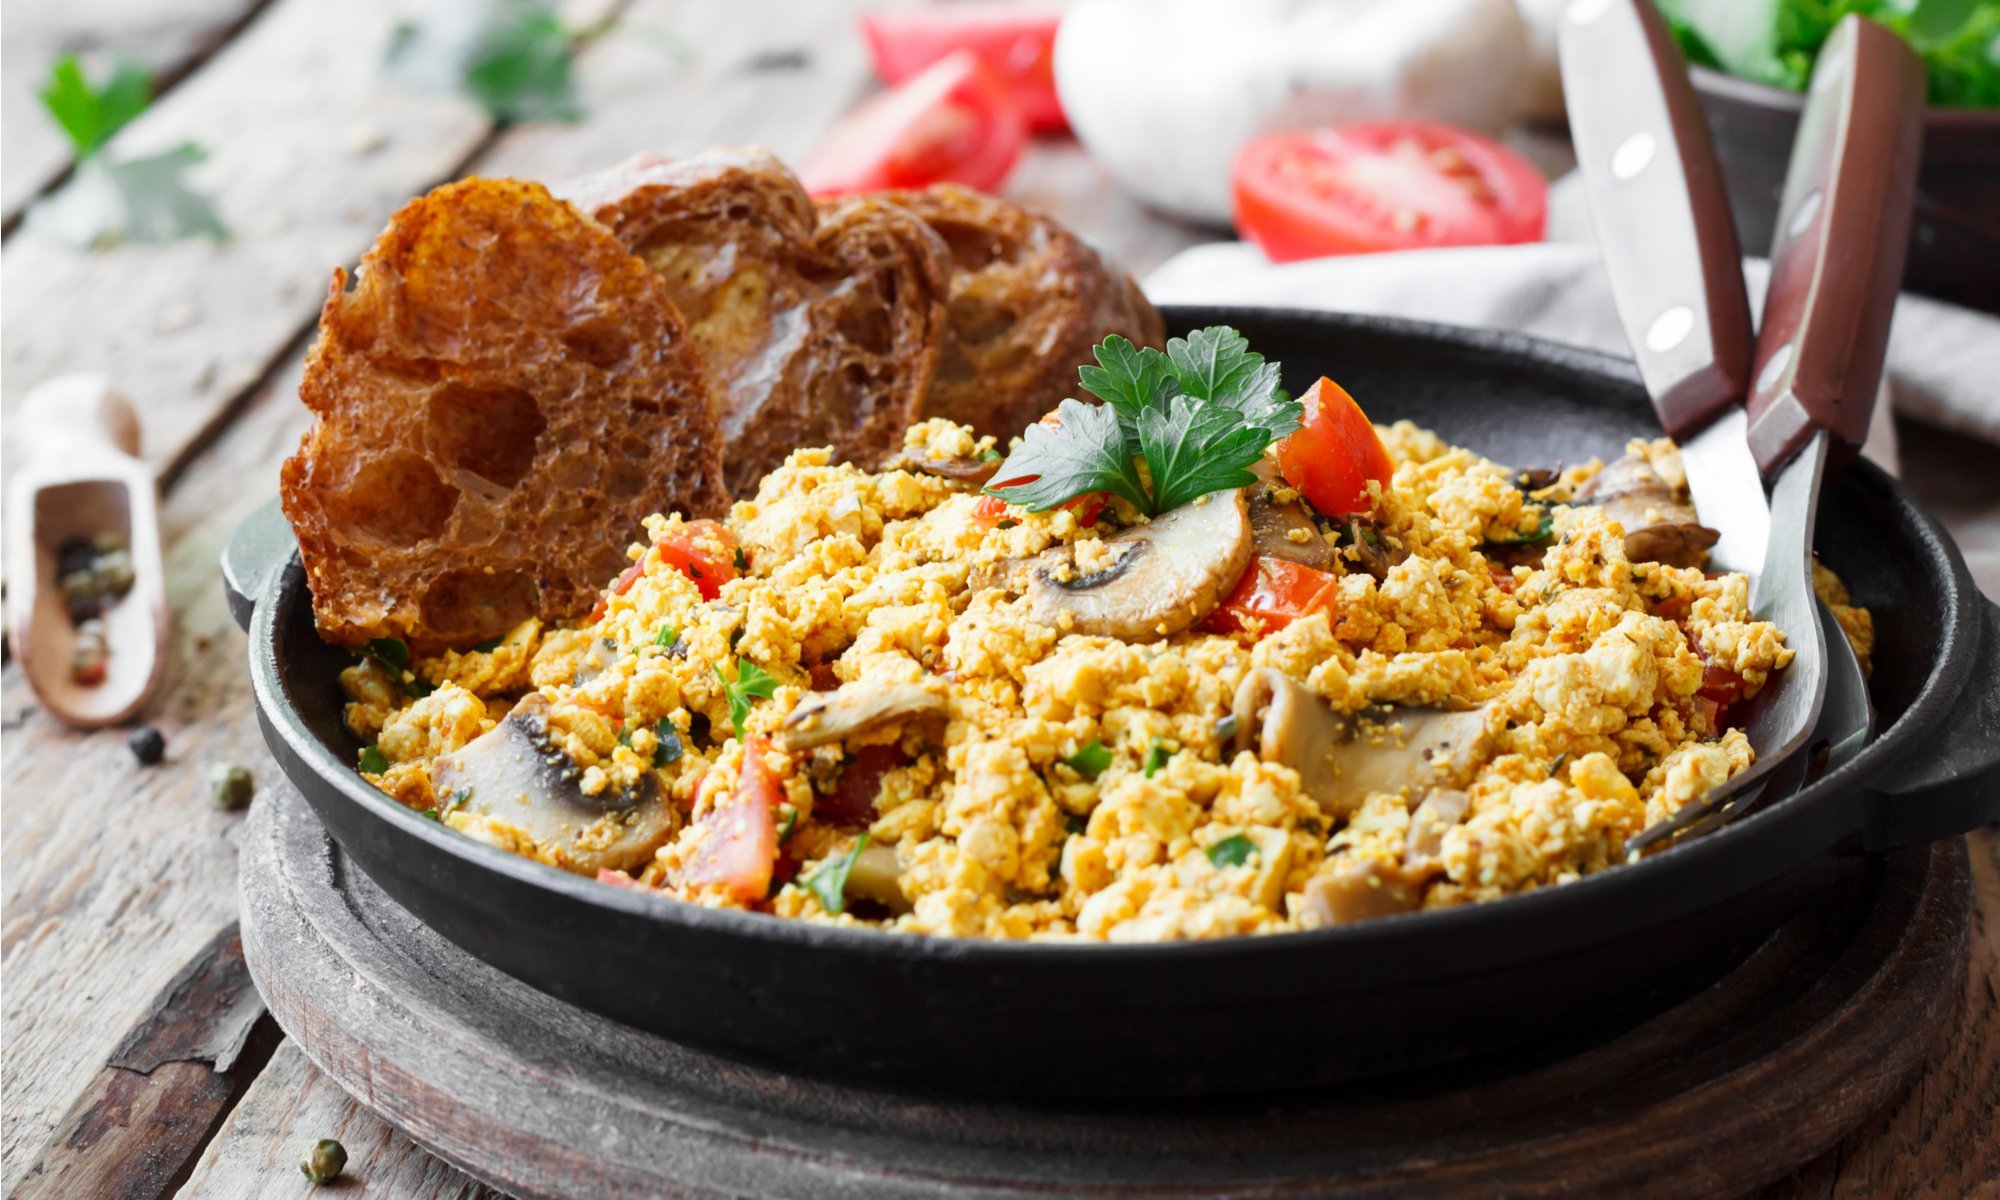 Turmeric Tofu Scramble: Quick, Filling, and Easy on the Wallet